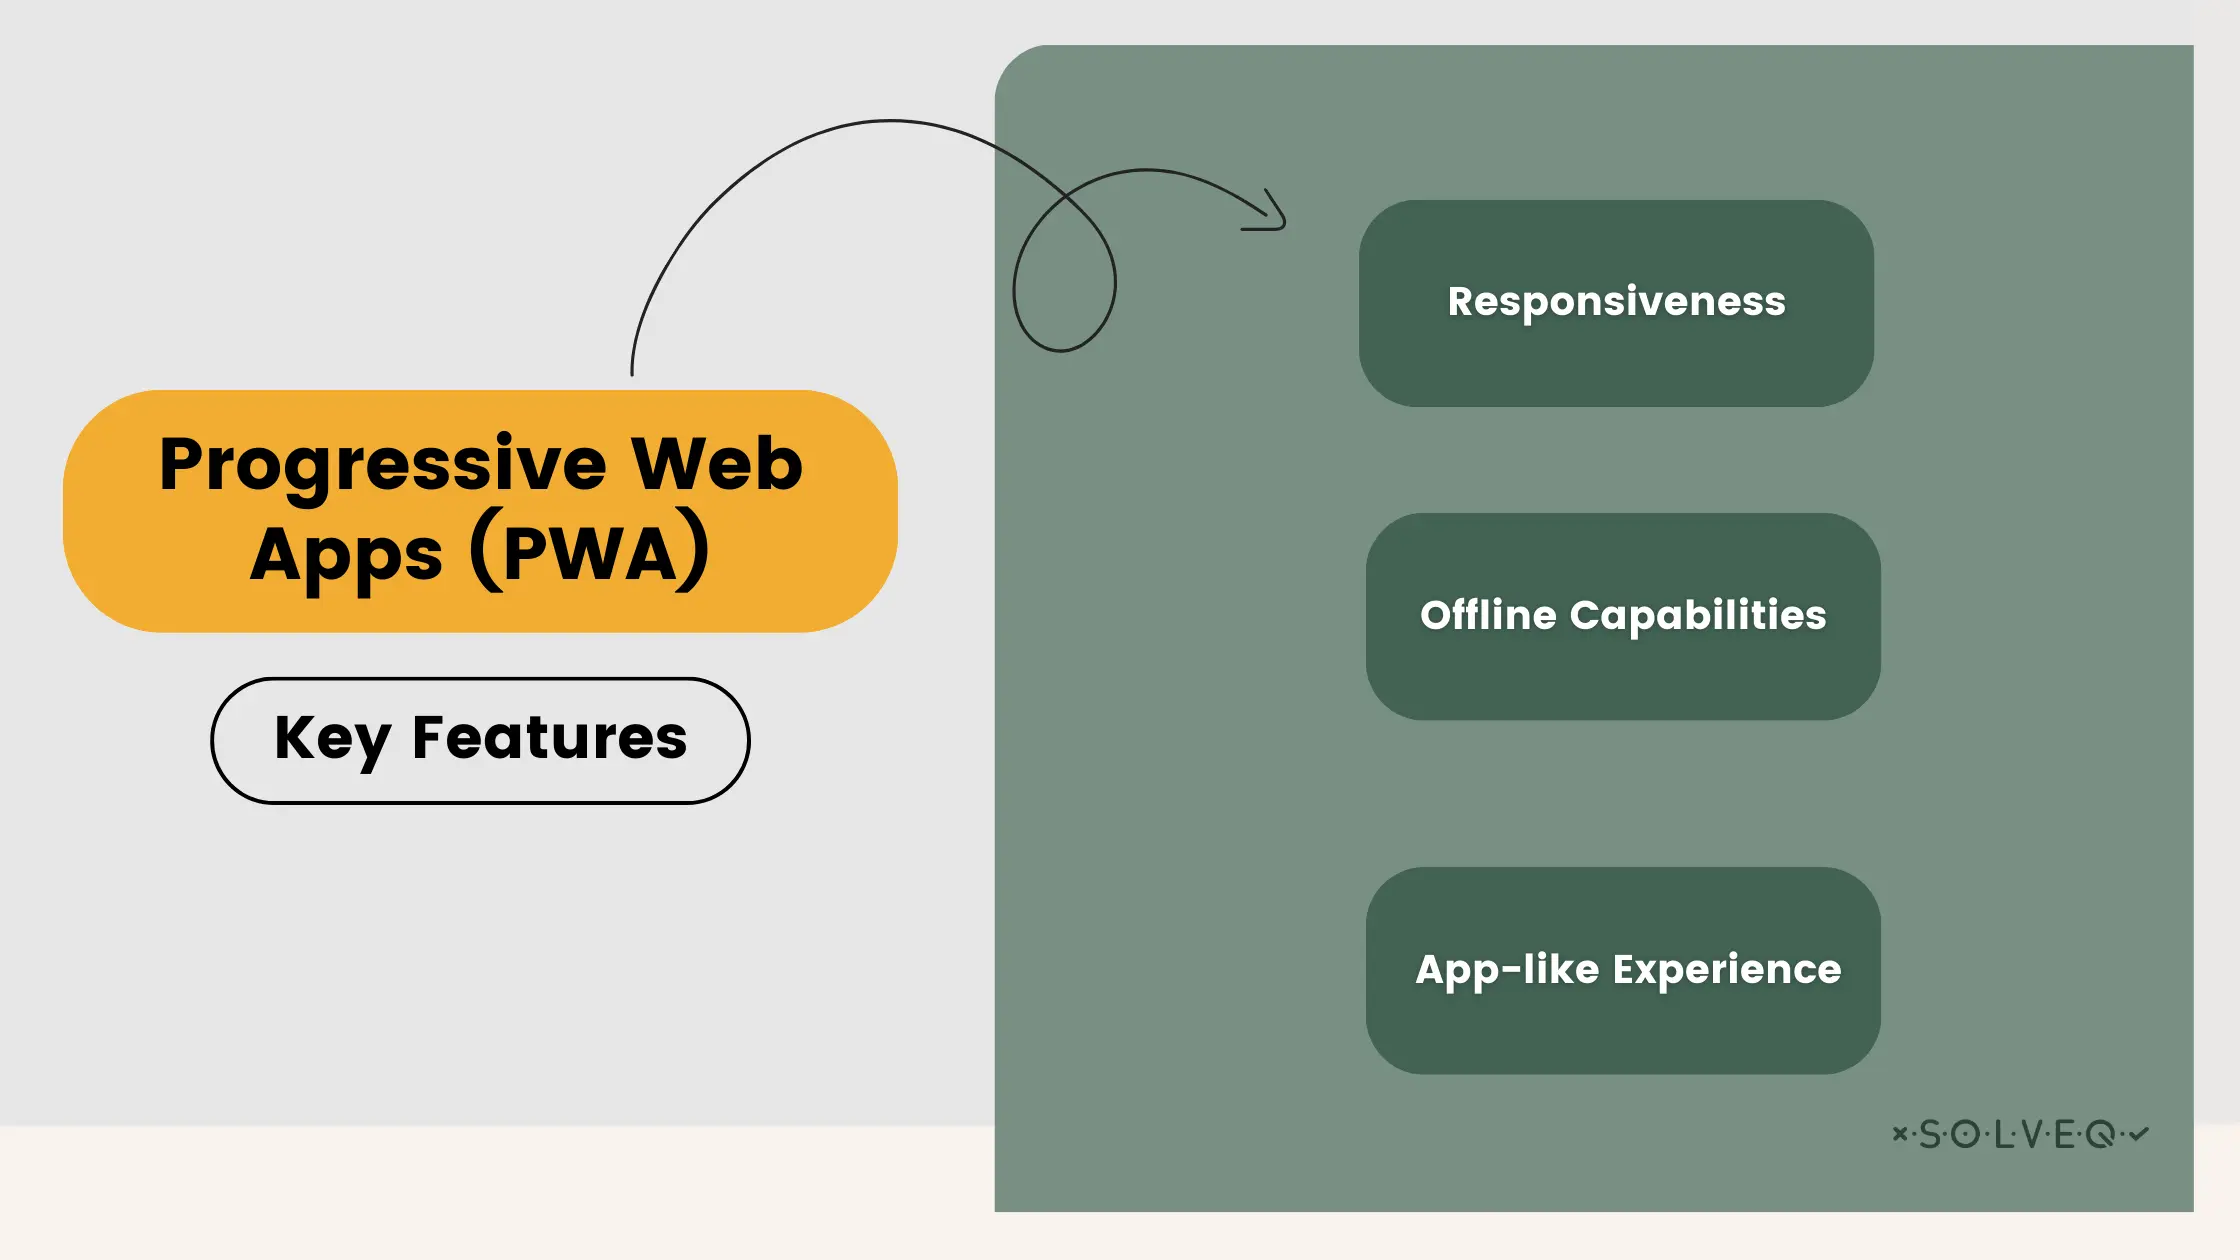 What are Progressive Web Apps (PWA) Key Features